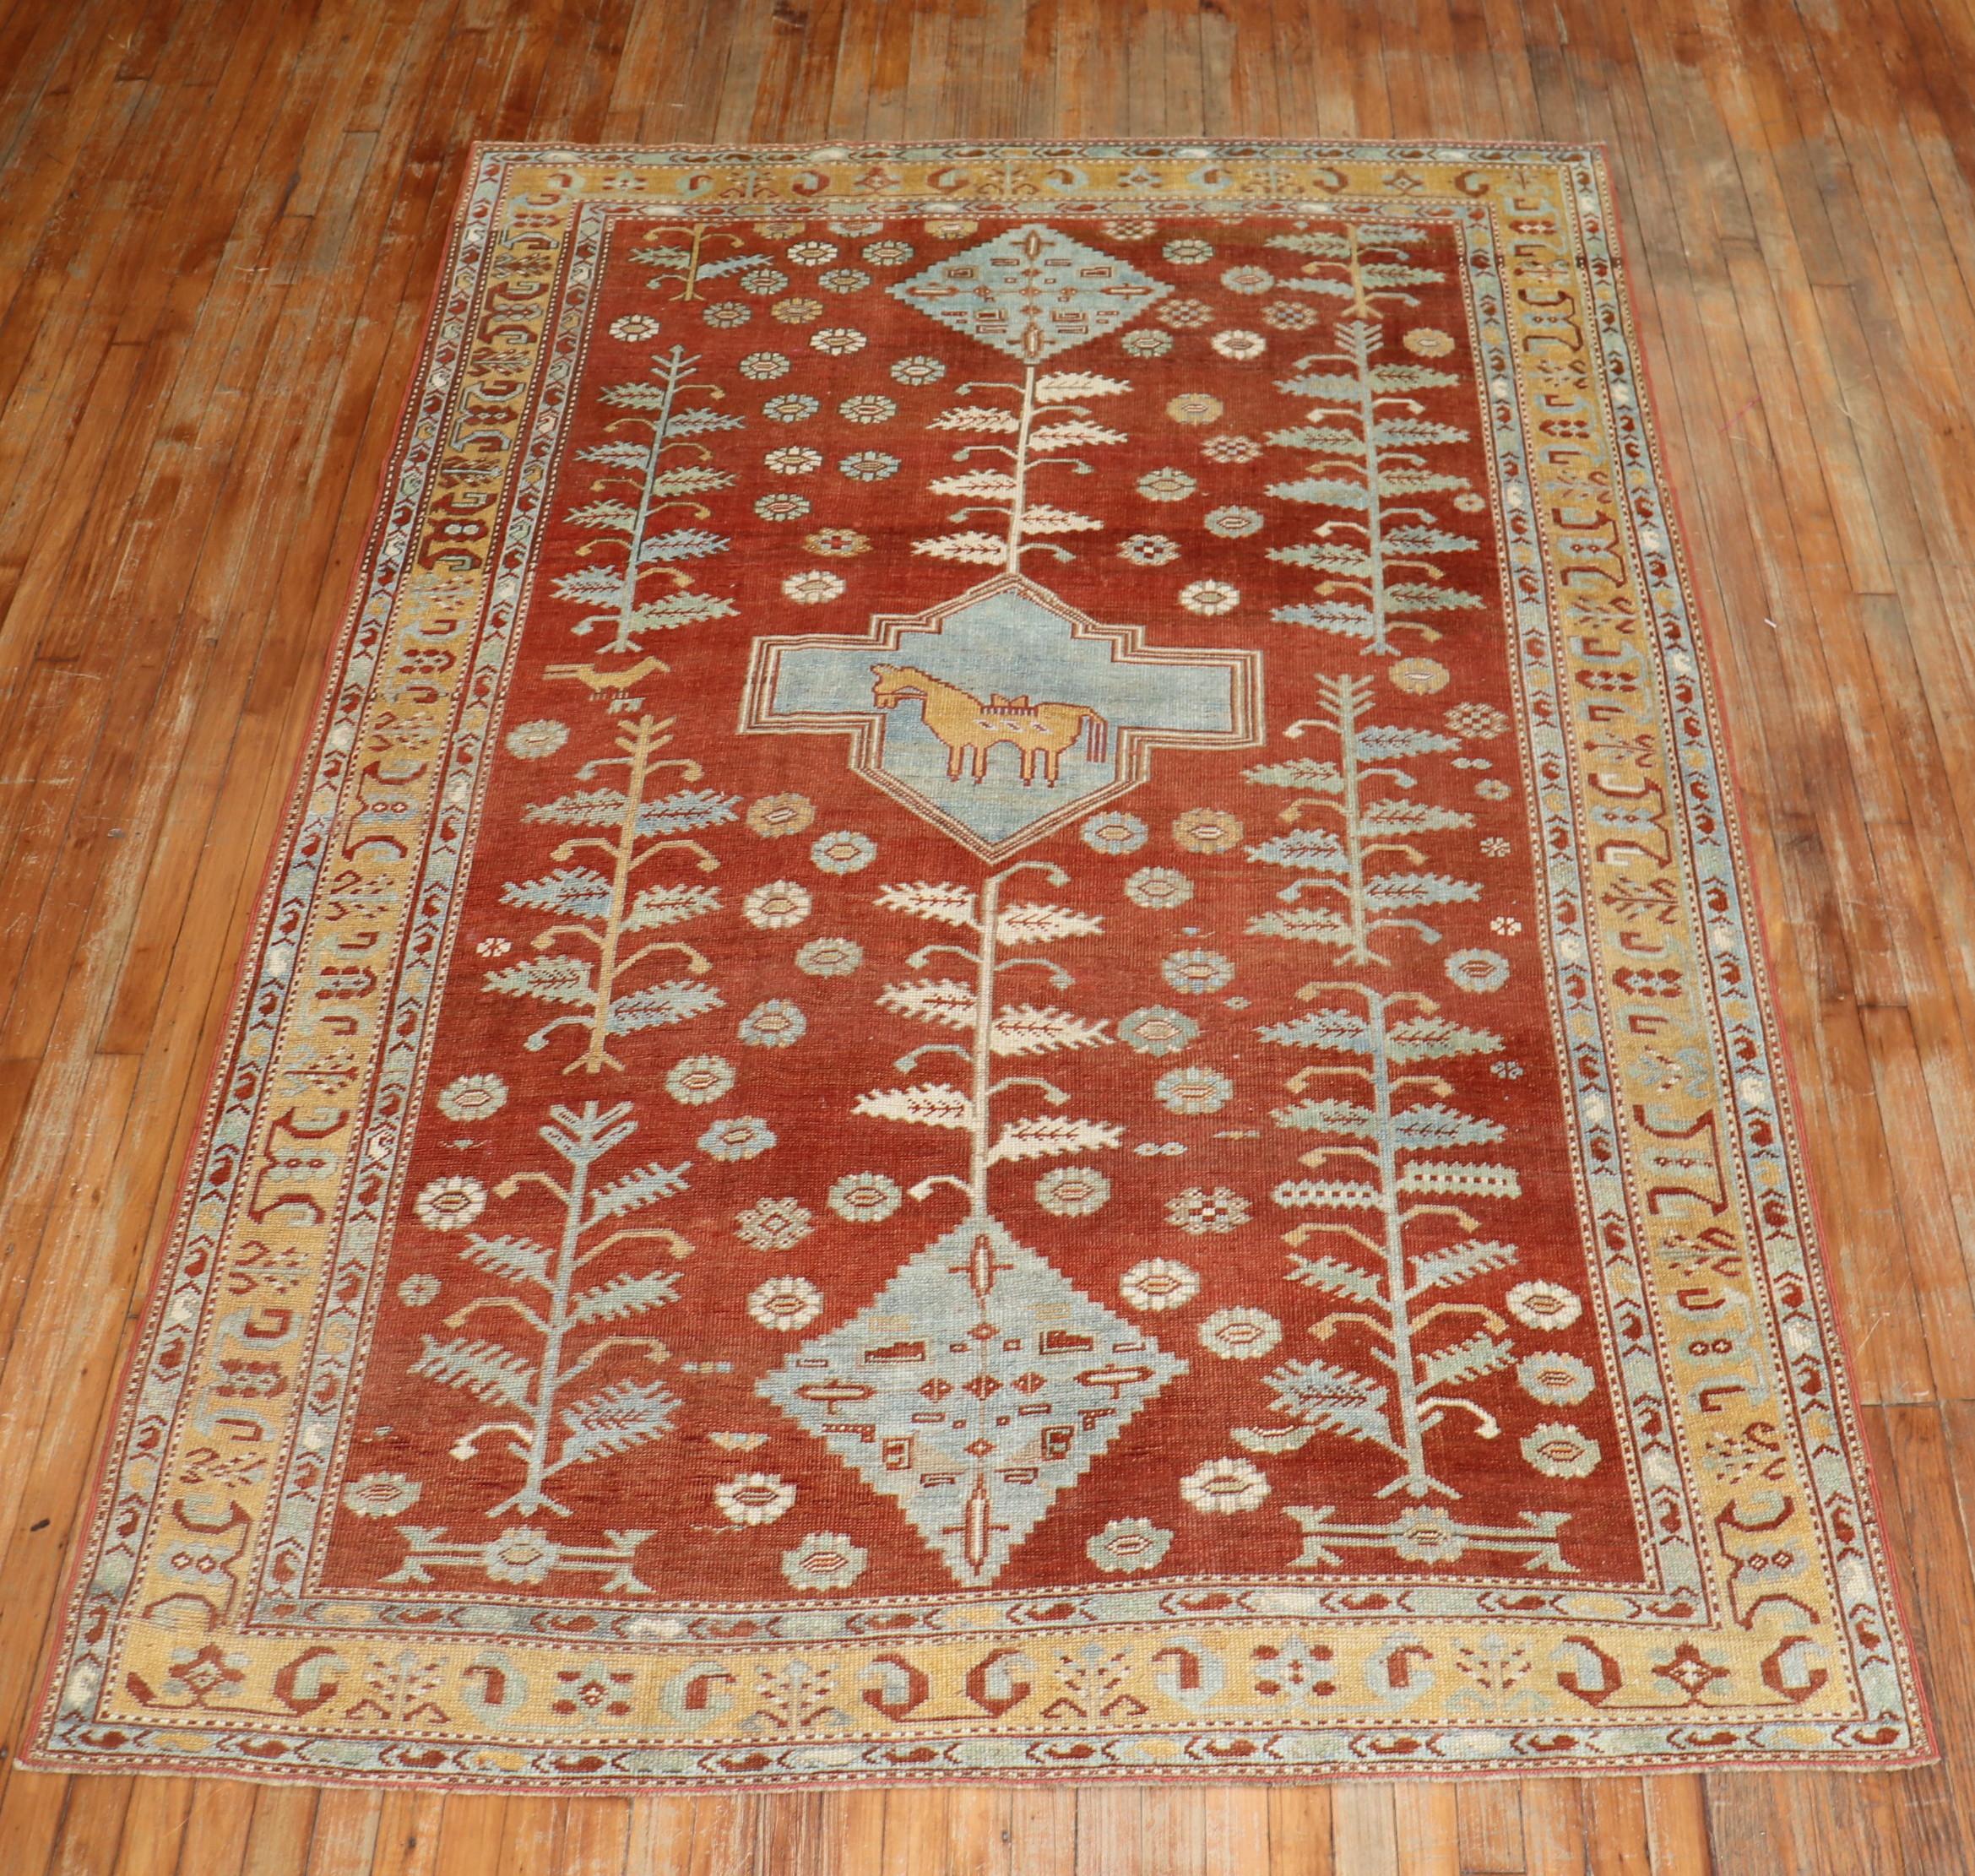 A geometric tribal looking Caucasian rug from the second quarter of the 20th century with saffron ground, accents in light blue and a goldenrod border. The central medallion has a camel on it, circa 1930.

Measures: 5'9